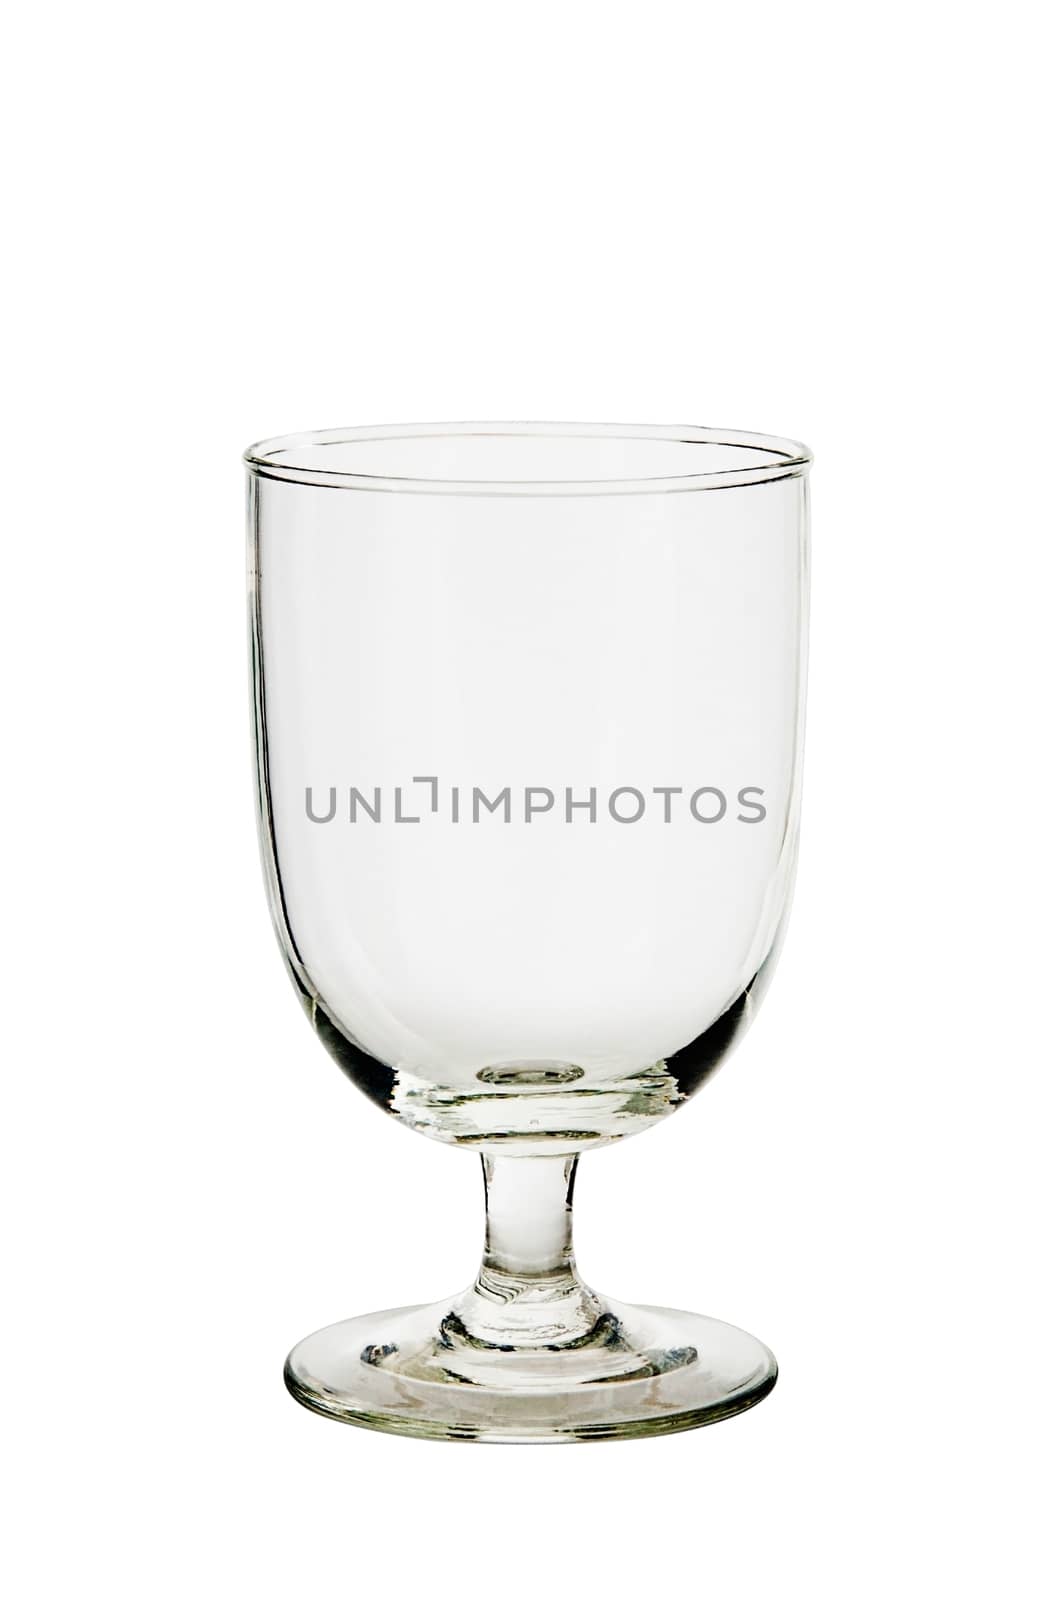 Empty glass isolated on a white background with clipping path